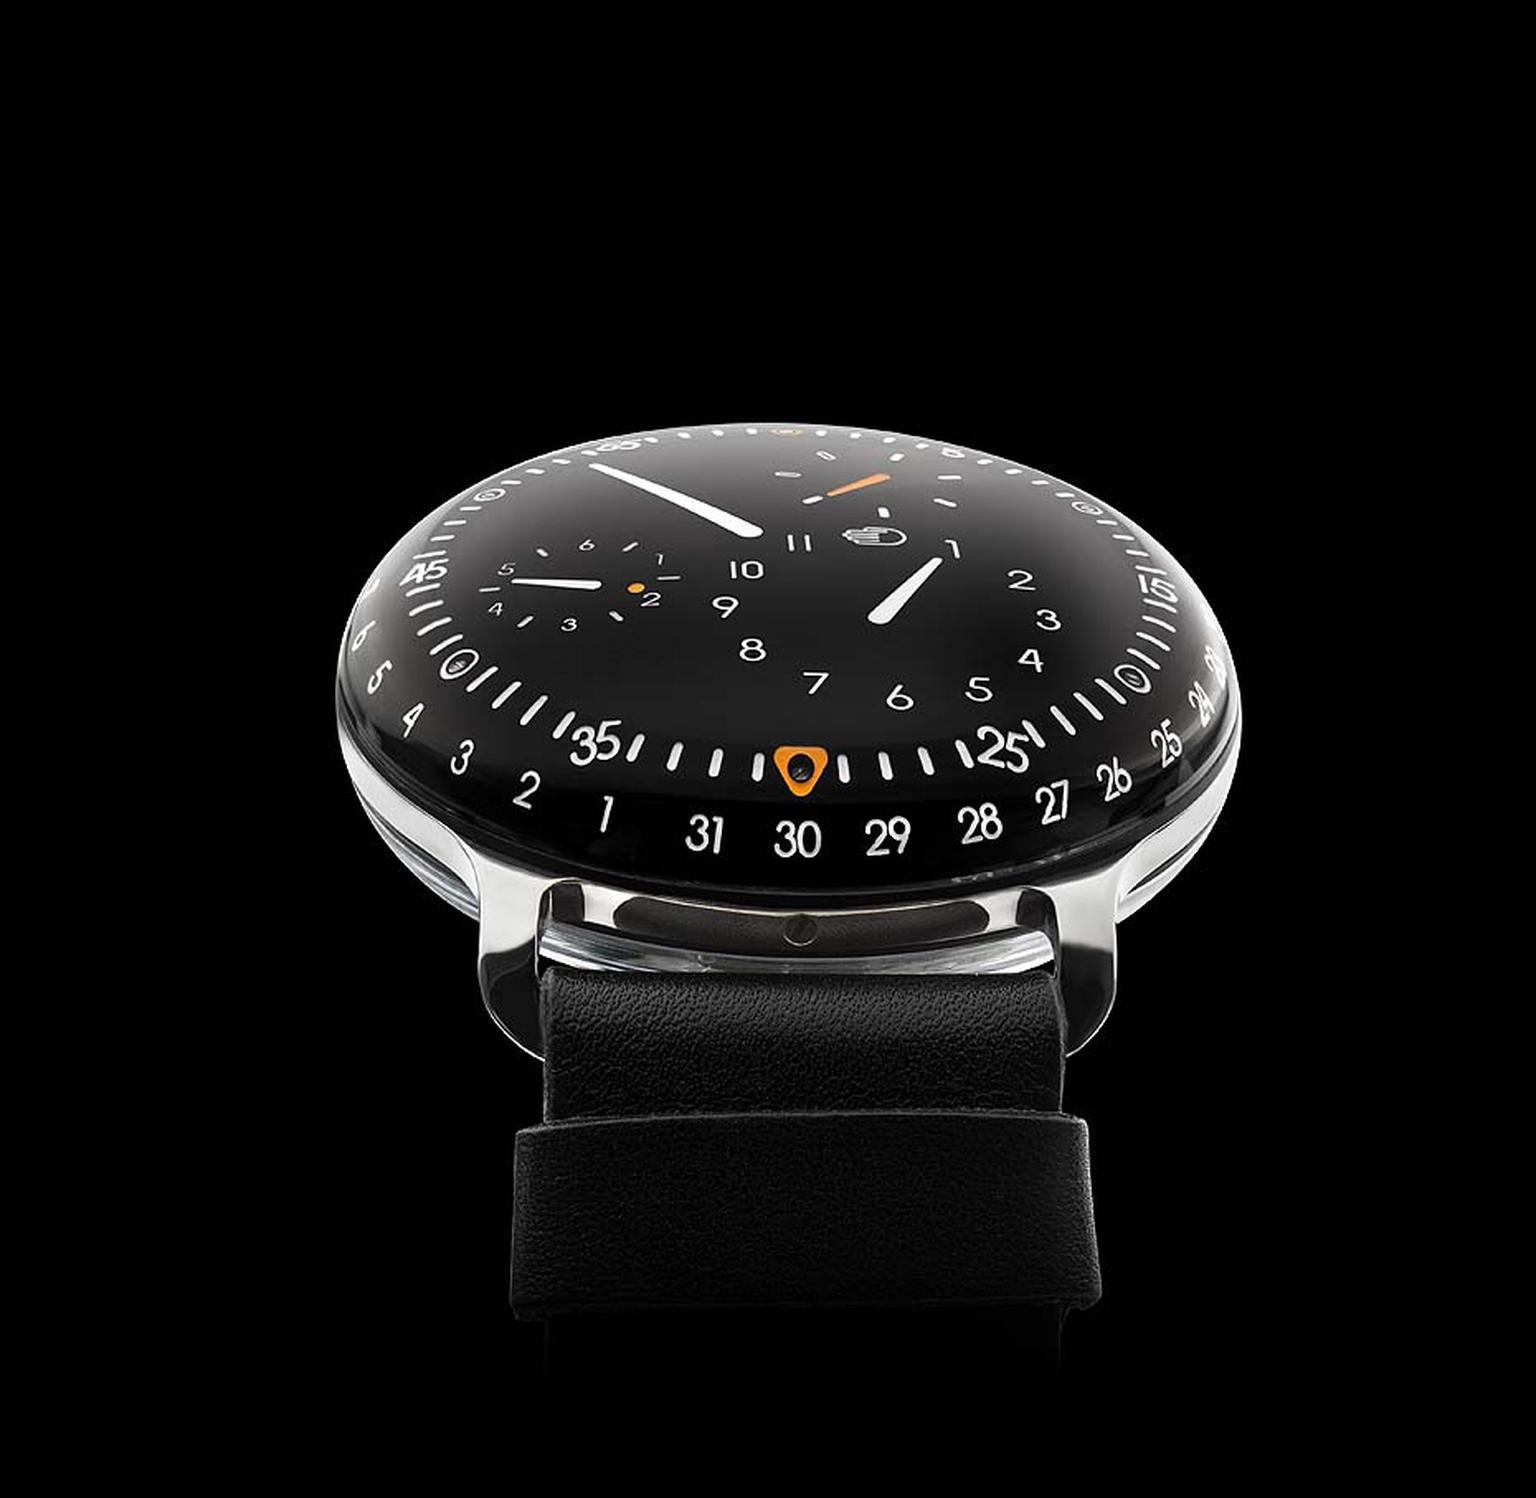 The Ressence Type 3 watch literally sees time floating under a bubble that curves up towards the viewer with its clear symbols marking the hours, minutes, seconds, days and date without the aid of hands or a crown.